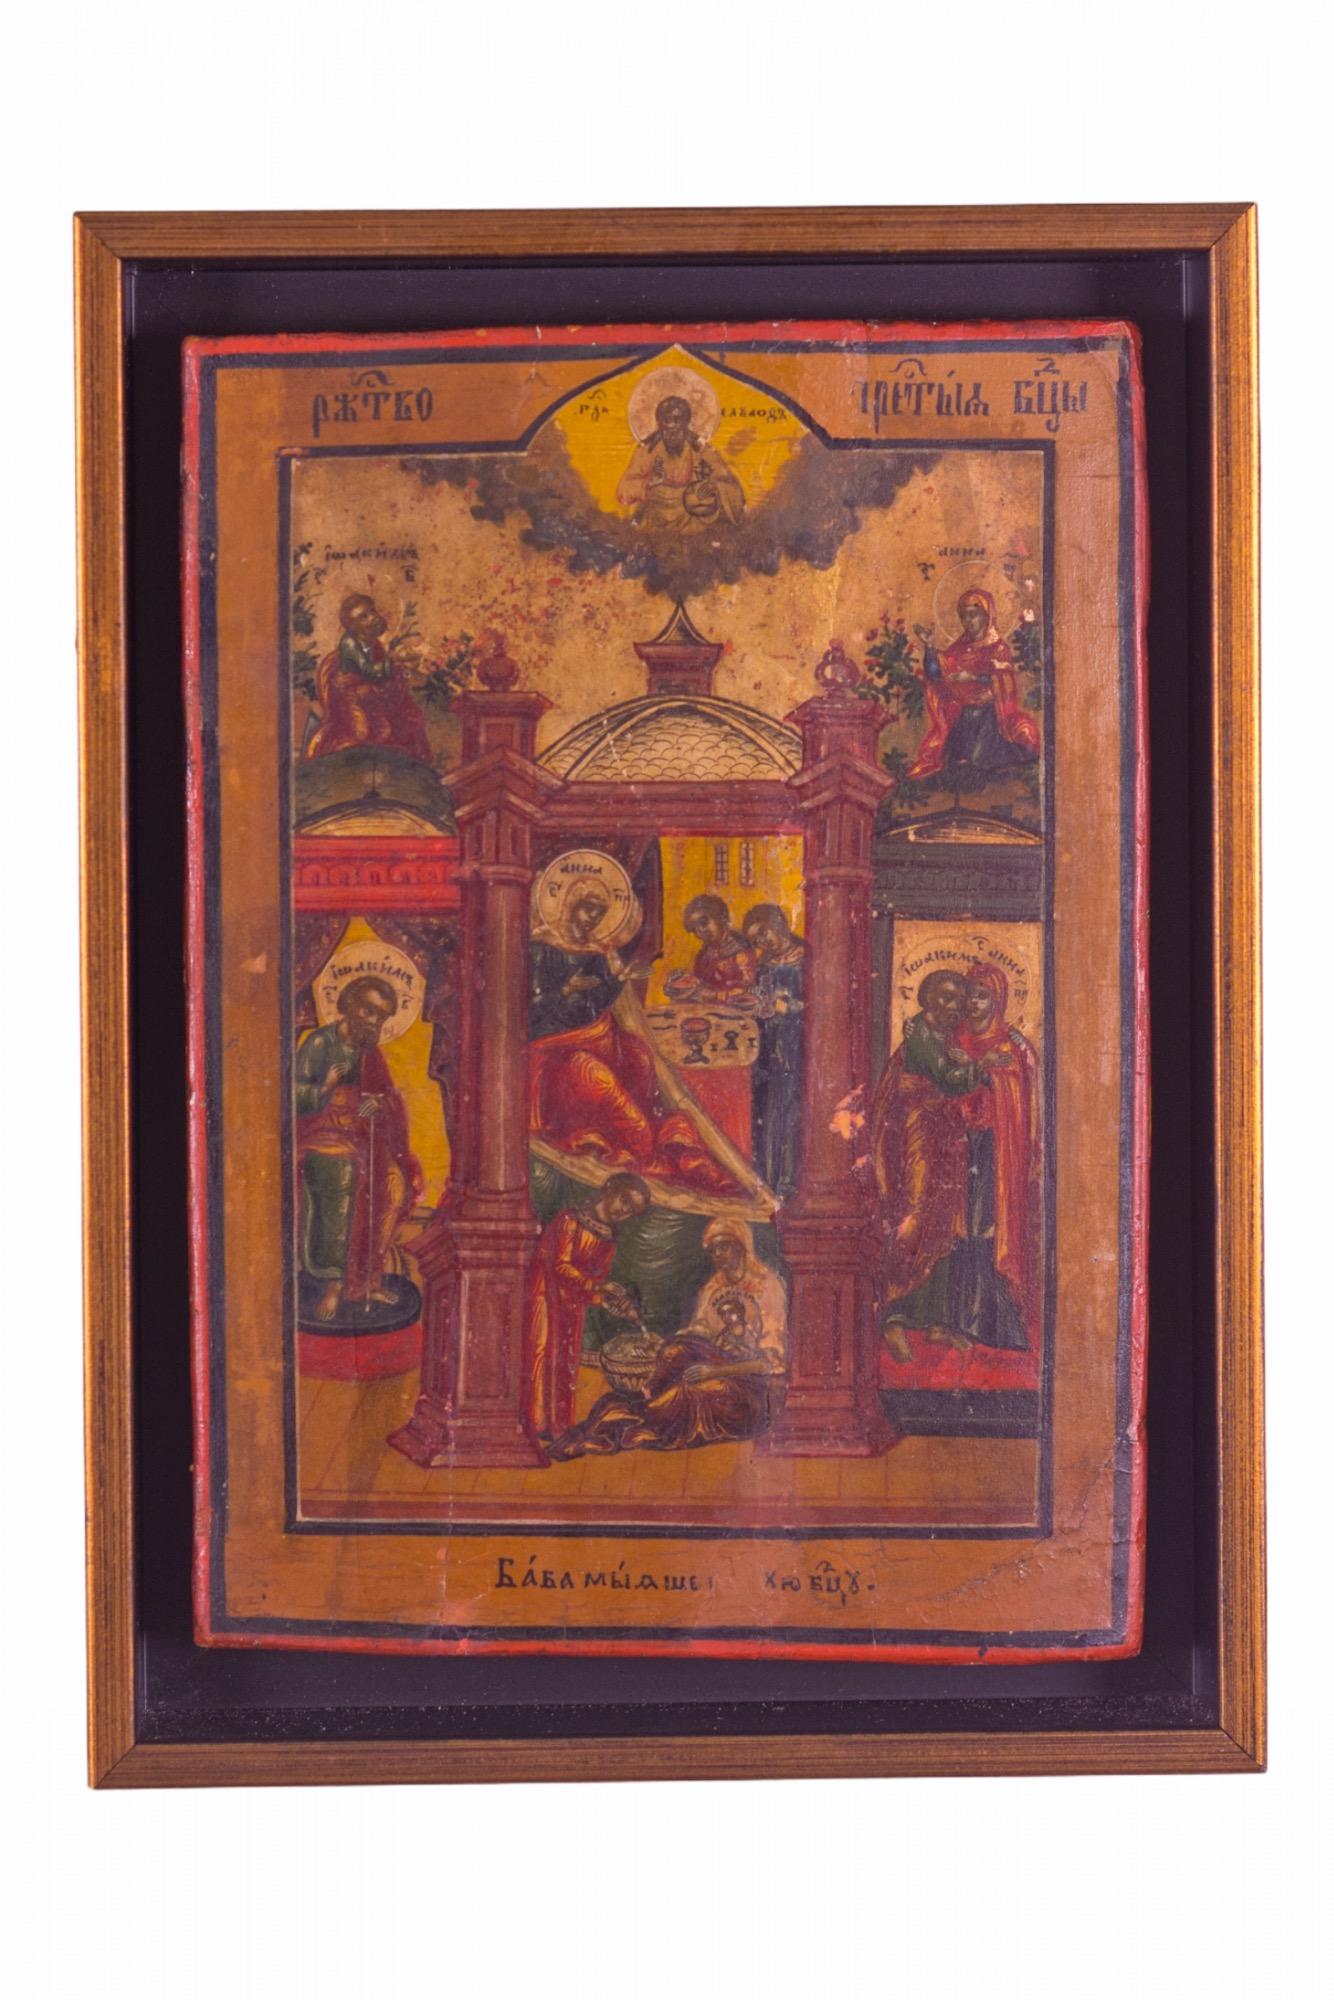 Late 17th Century Russian Orthodox Icon of the Nativity of the Mother of God painted over gold leaf and gesso laid on a wooden board. It has been framed with a gold gilded museum mount frame and mounted on a Lucite panel framed with a gold gilded